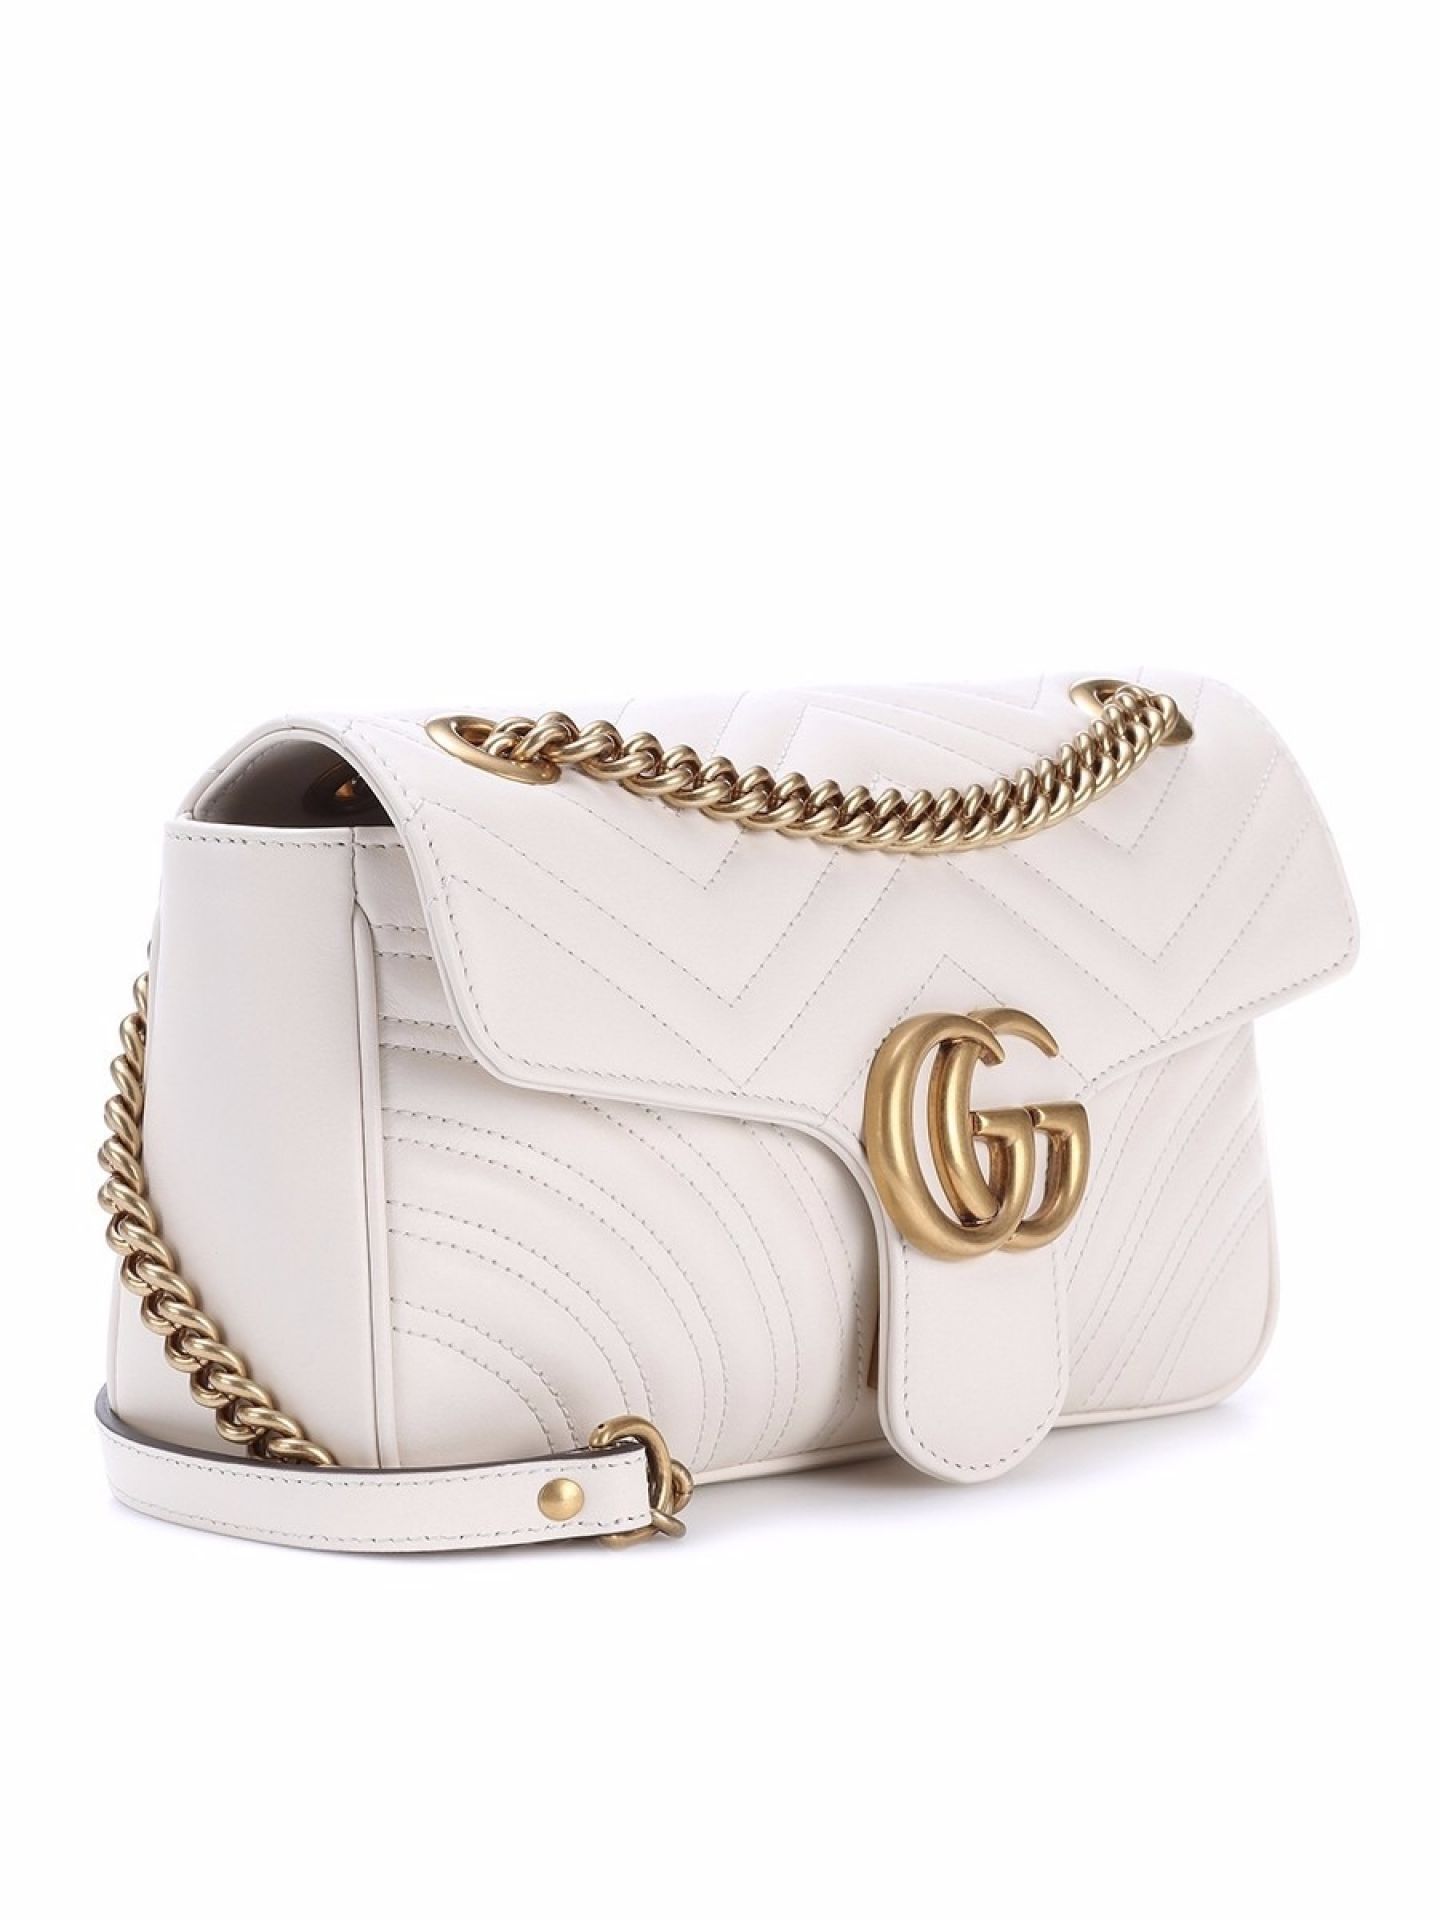 GUCCI GG MARMONT MATELASSÉ WHITE LEATHER SHOULDER BAG for sale on Luxify